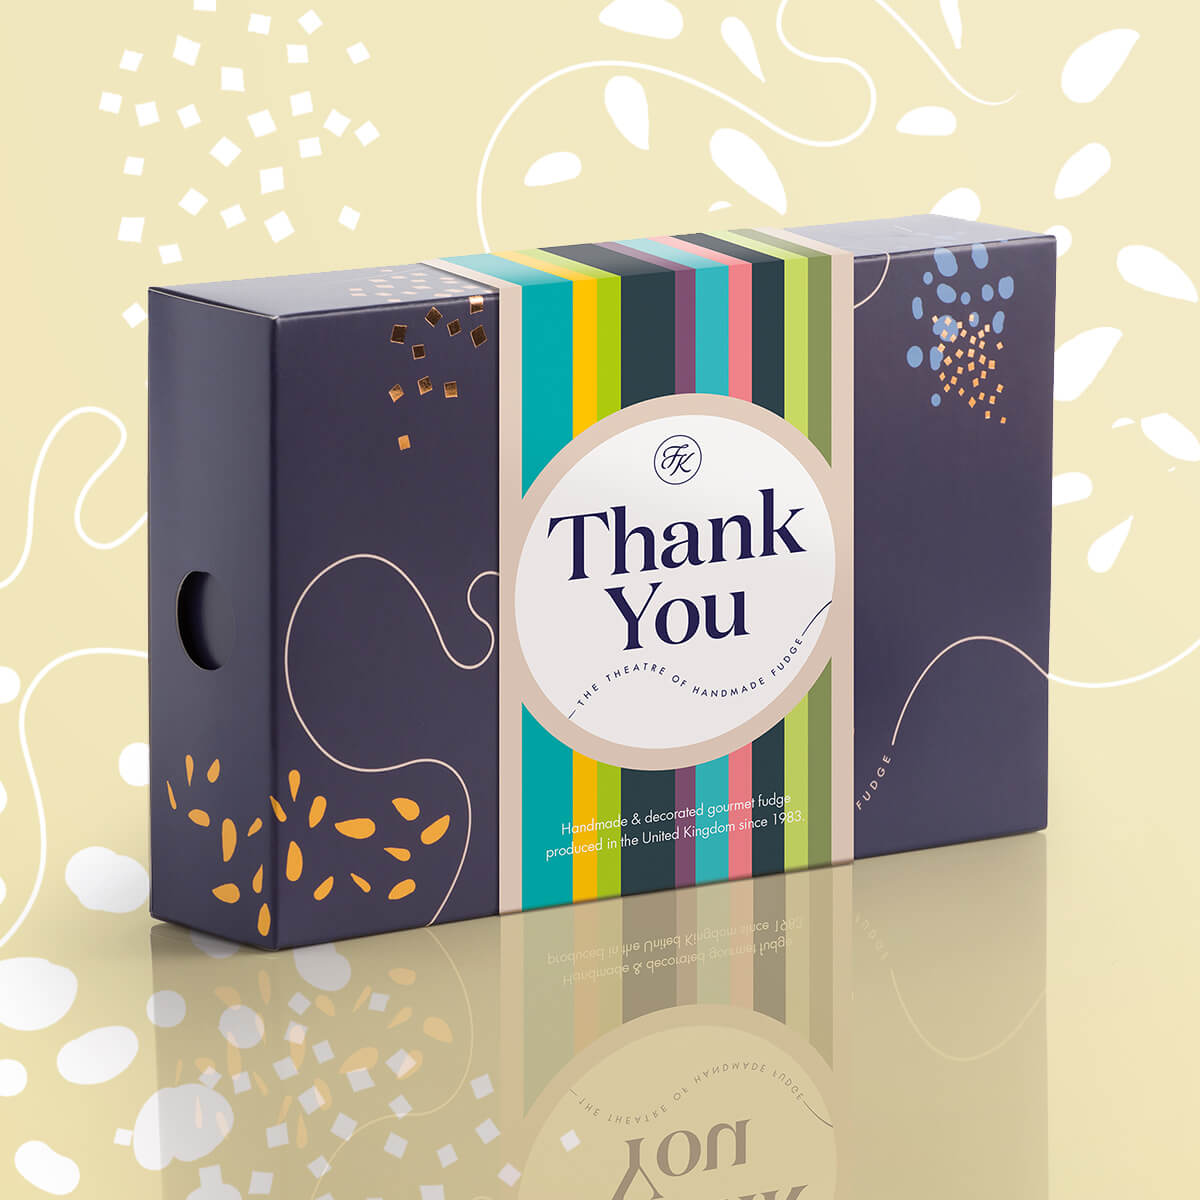 Thank You Traditional Favourites Fudge Selection Butter Fudge Gift Box